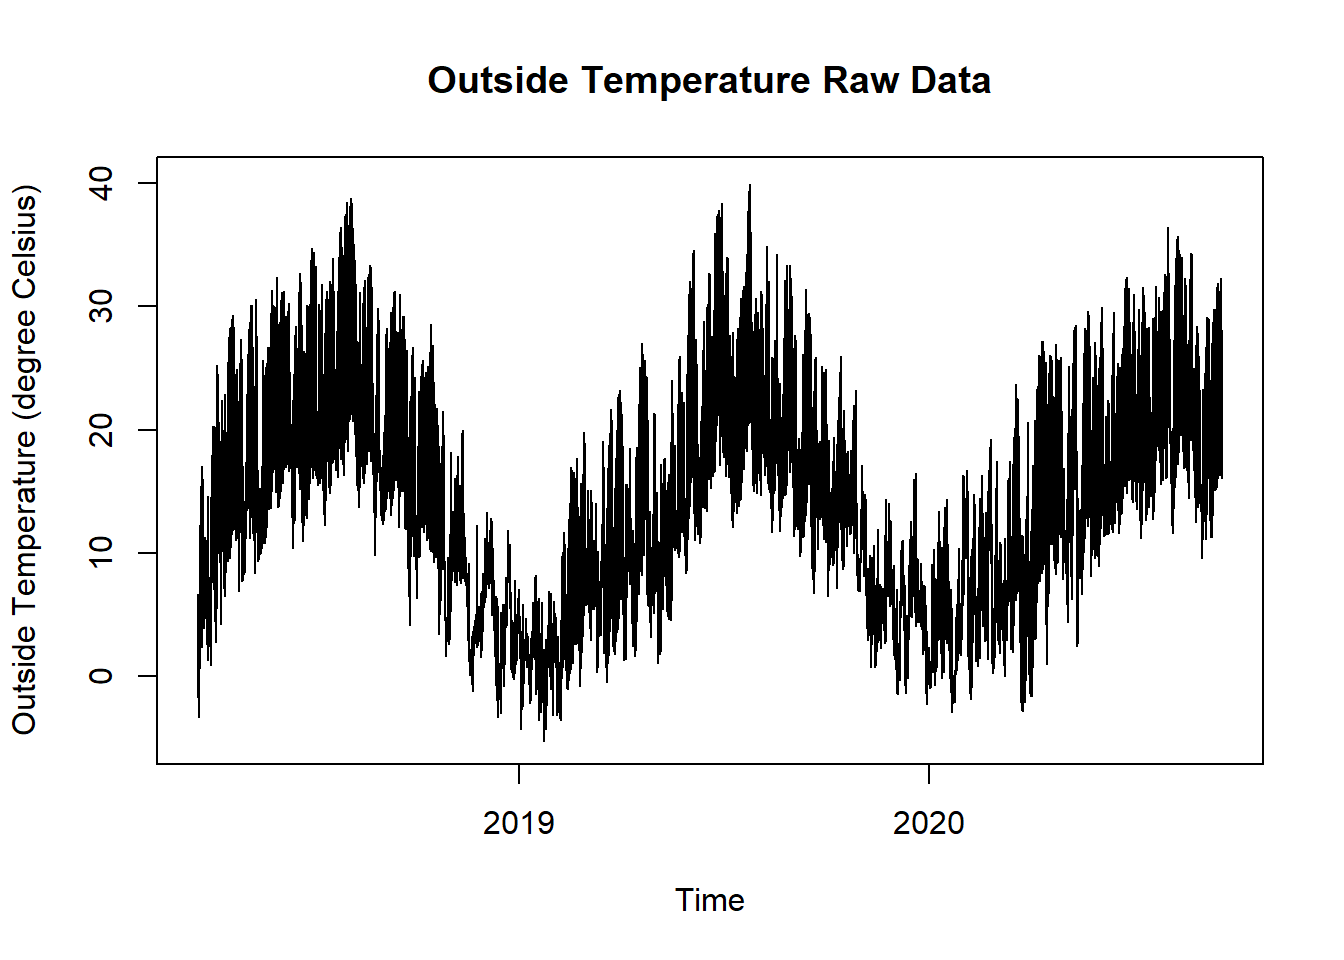 Outside Temperature Raw Data for Sum Frequency Hours Plot